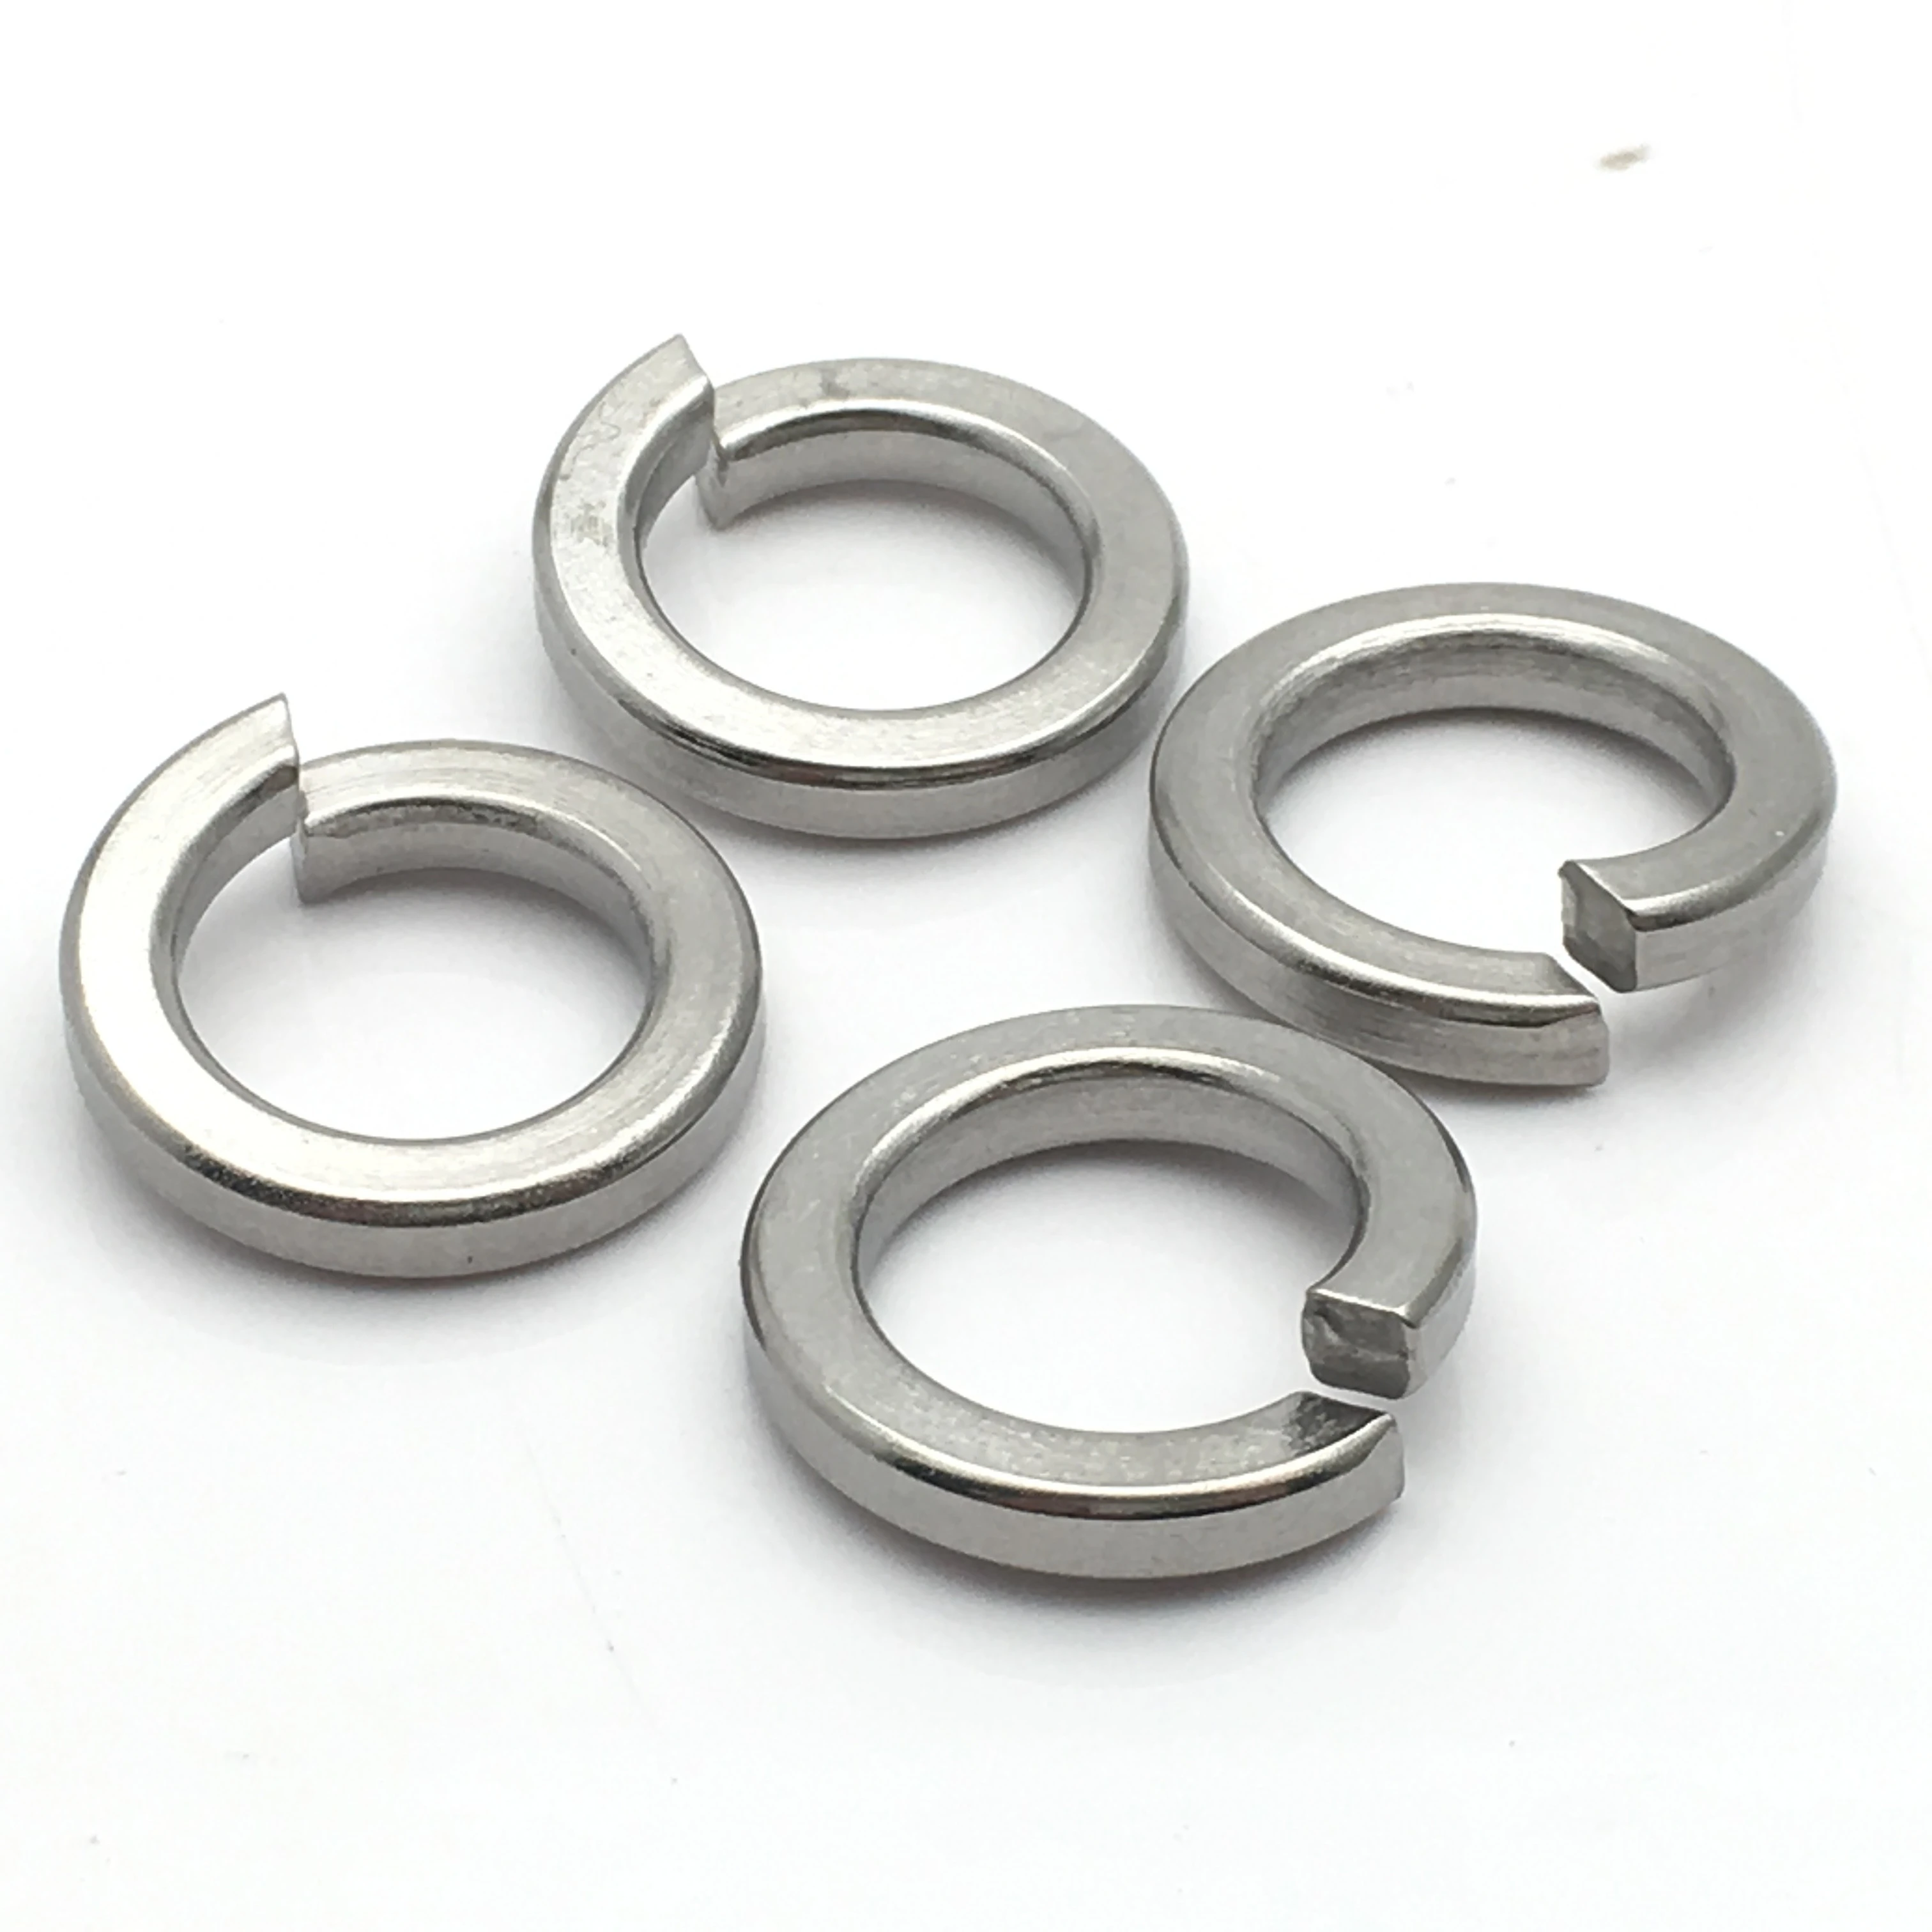 M3 M4 M5 M6 M8 DIN127 stainless steel spring washer